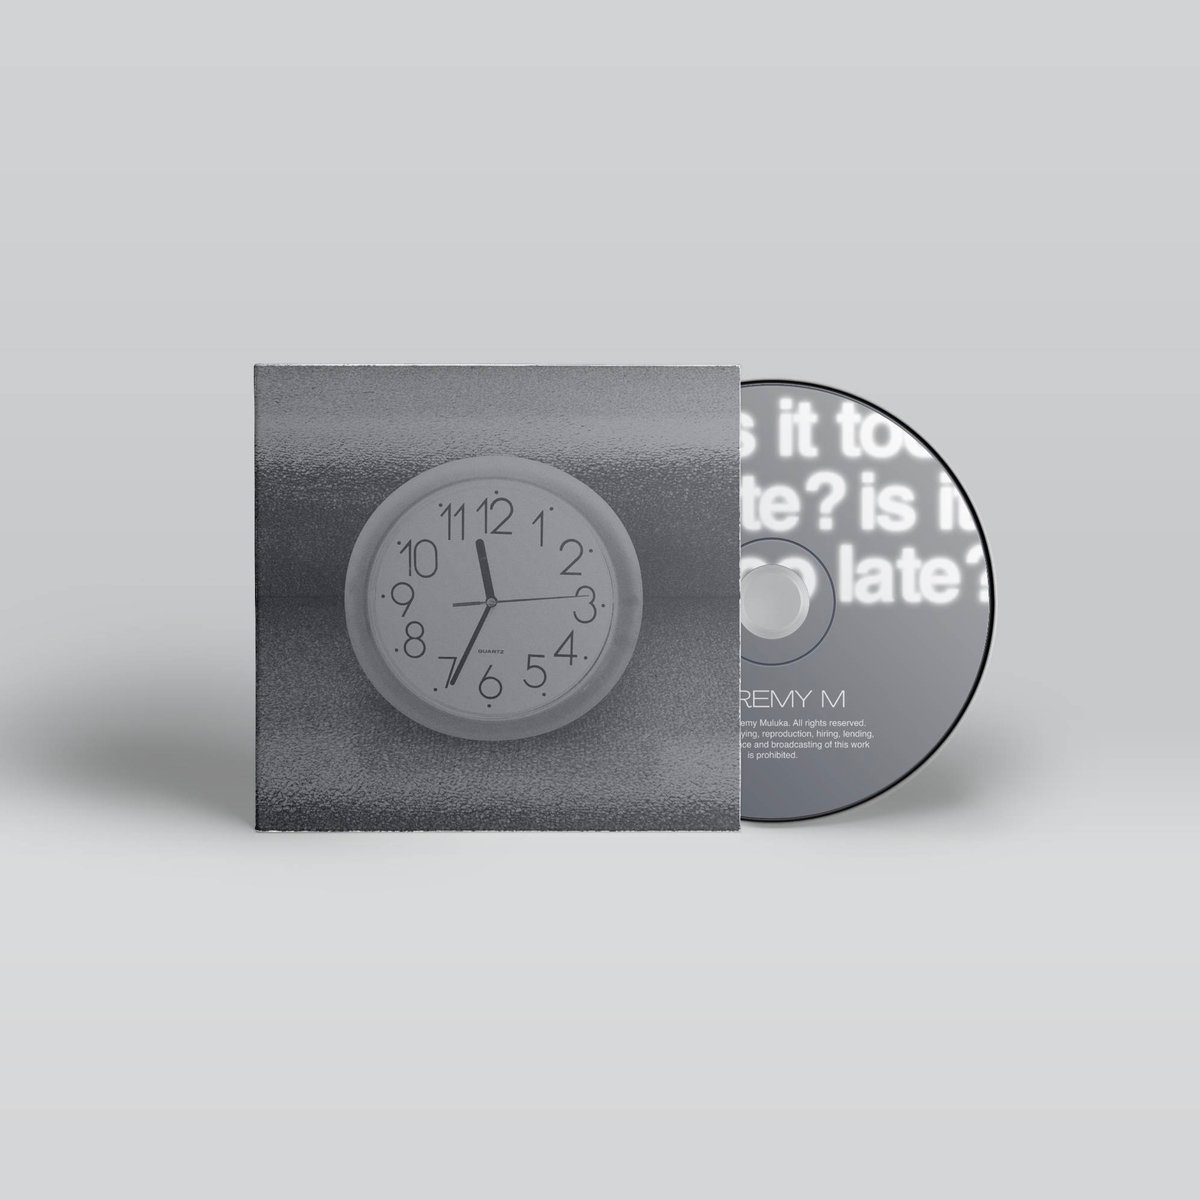 Image of is it too late? CD - preorder